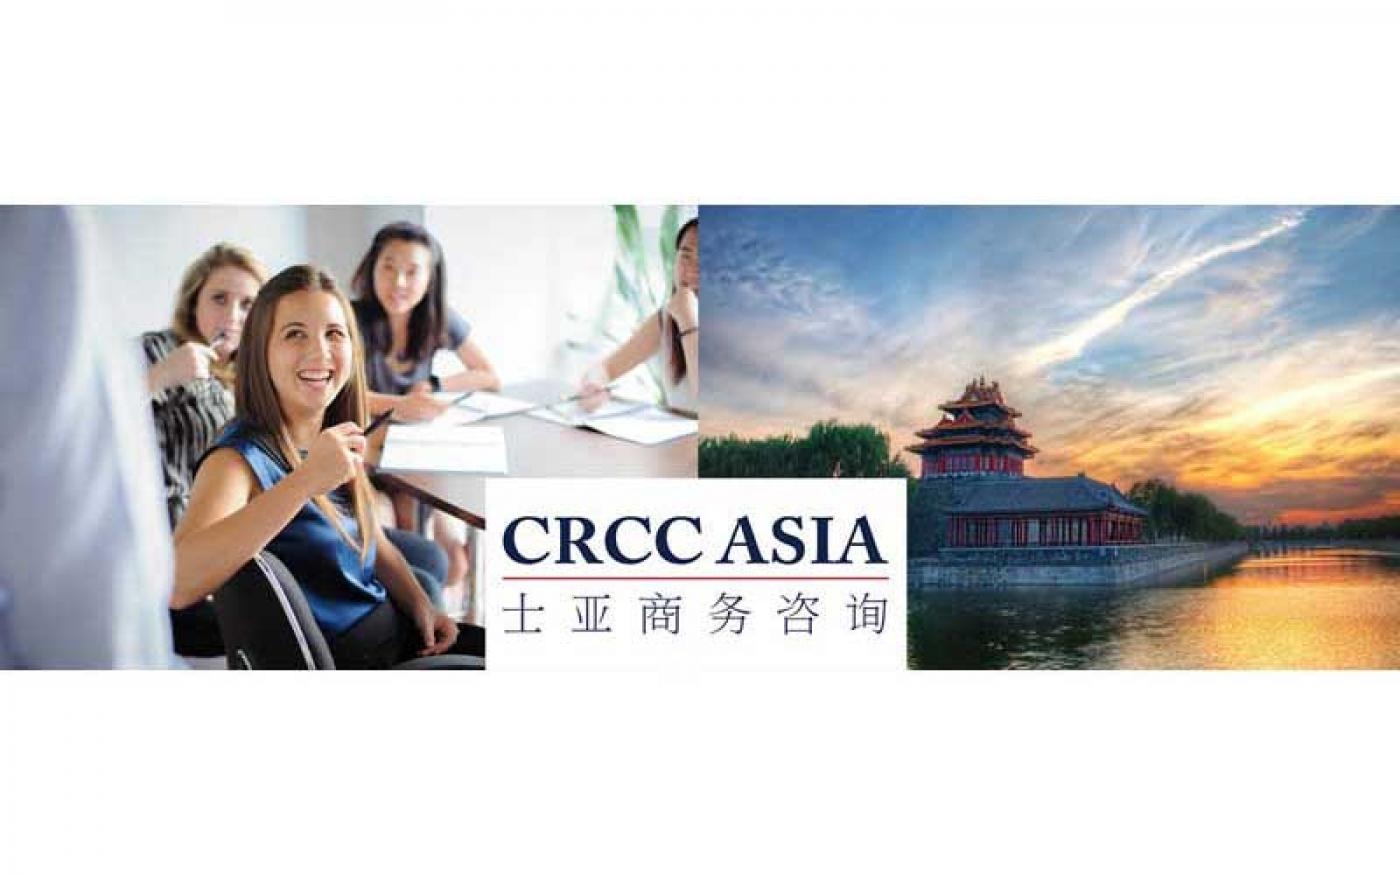 CRCC Asia: An internship in China is the adventure of a lifetime!